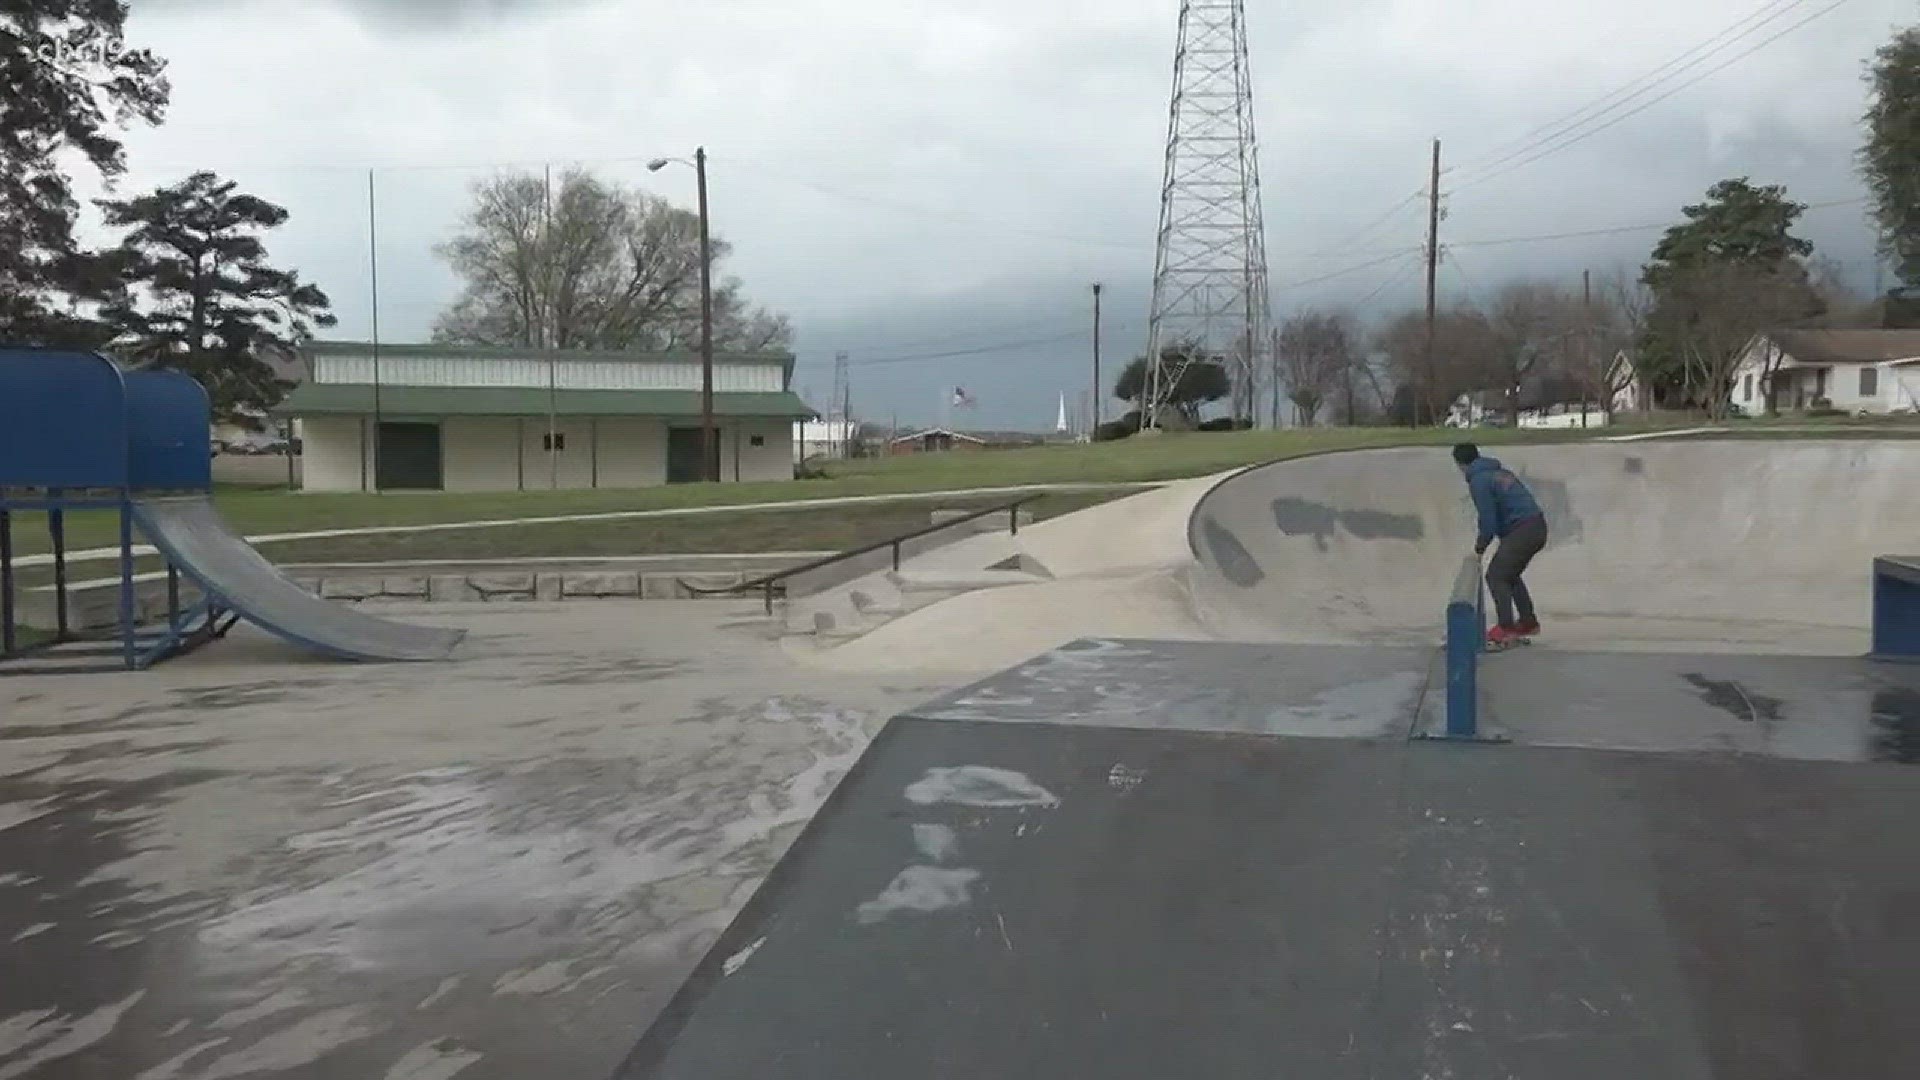 There's a possibility a new skate park could be built in Longview